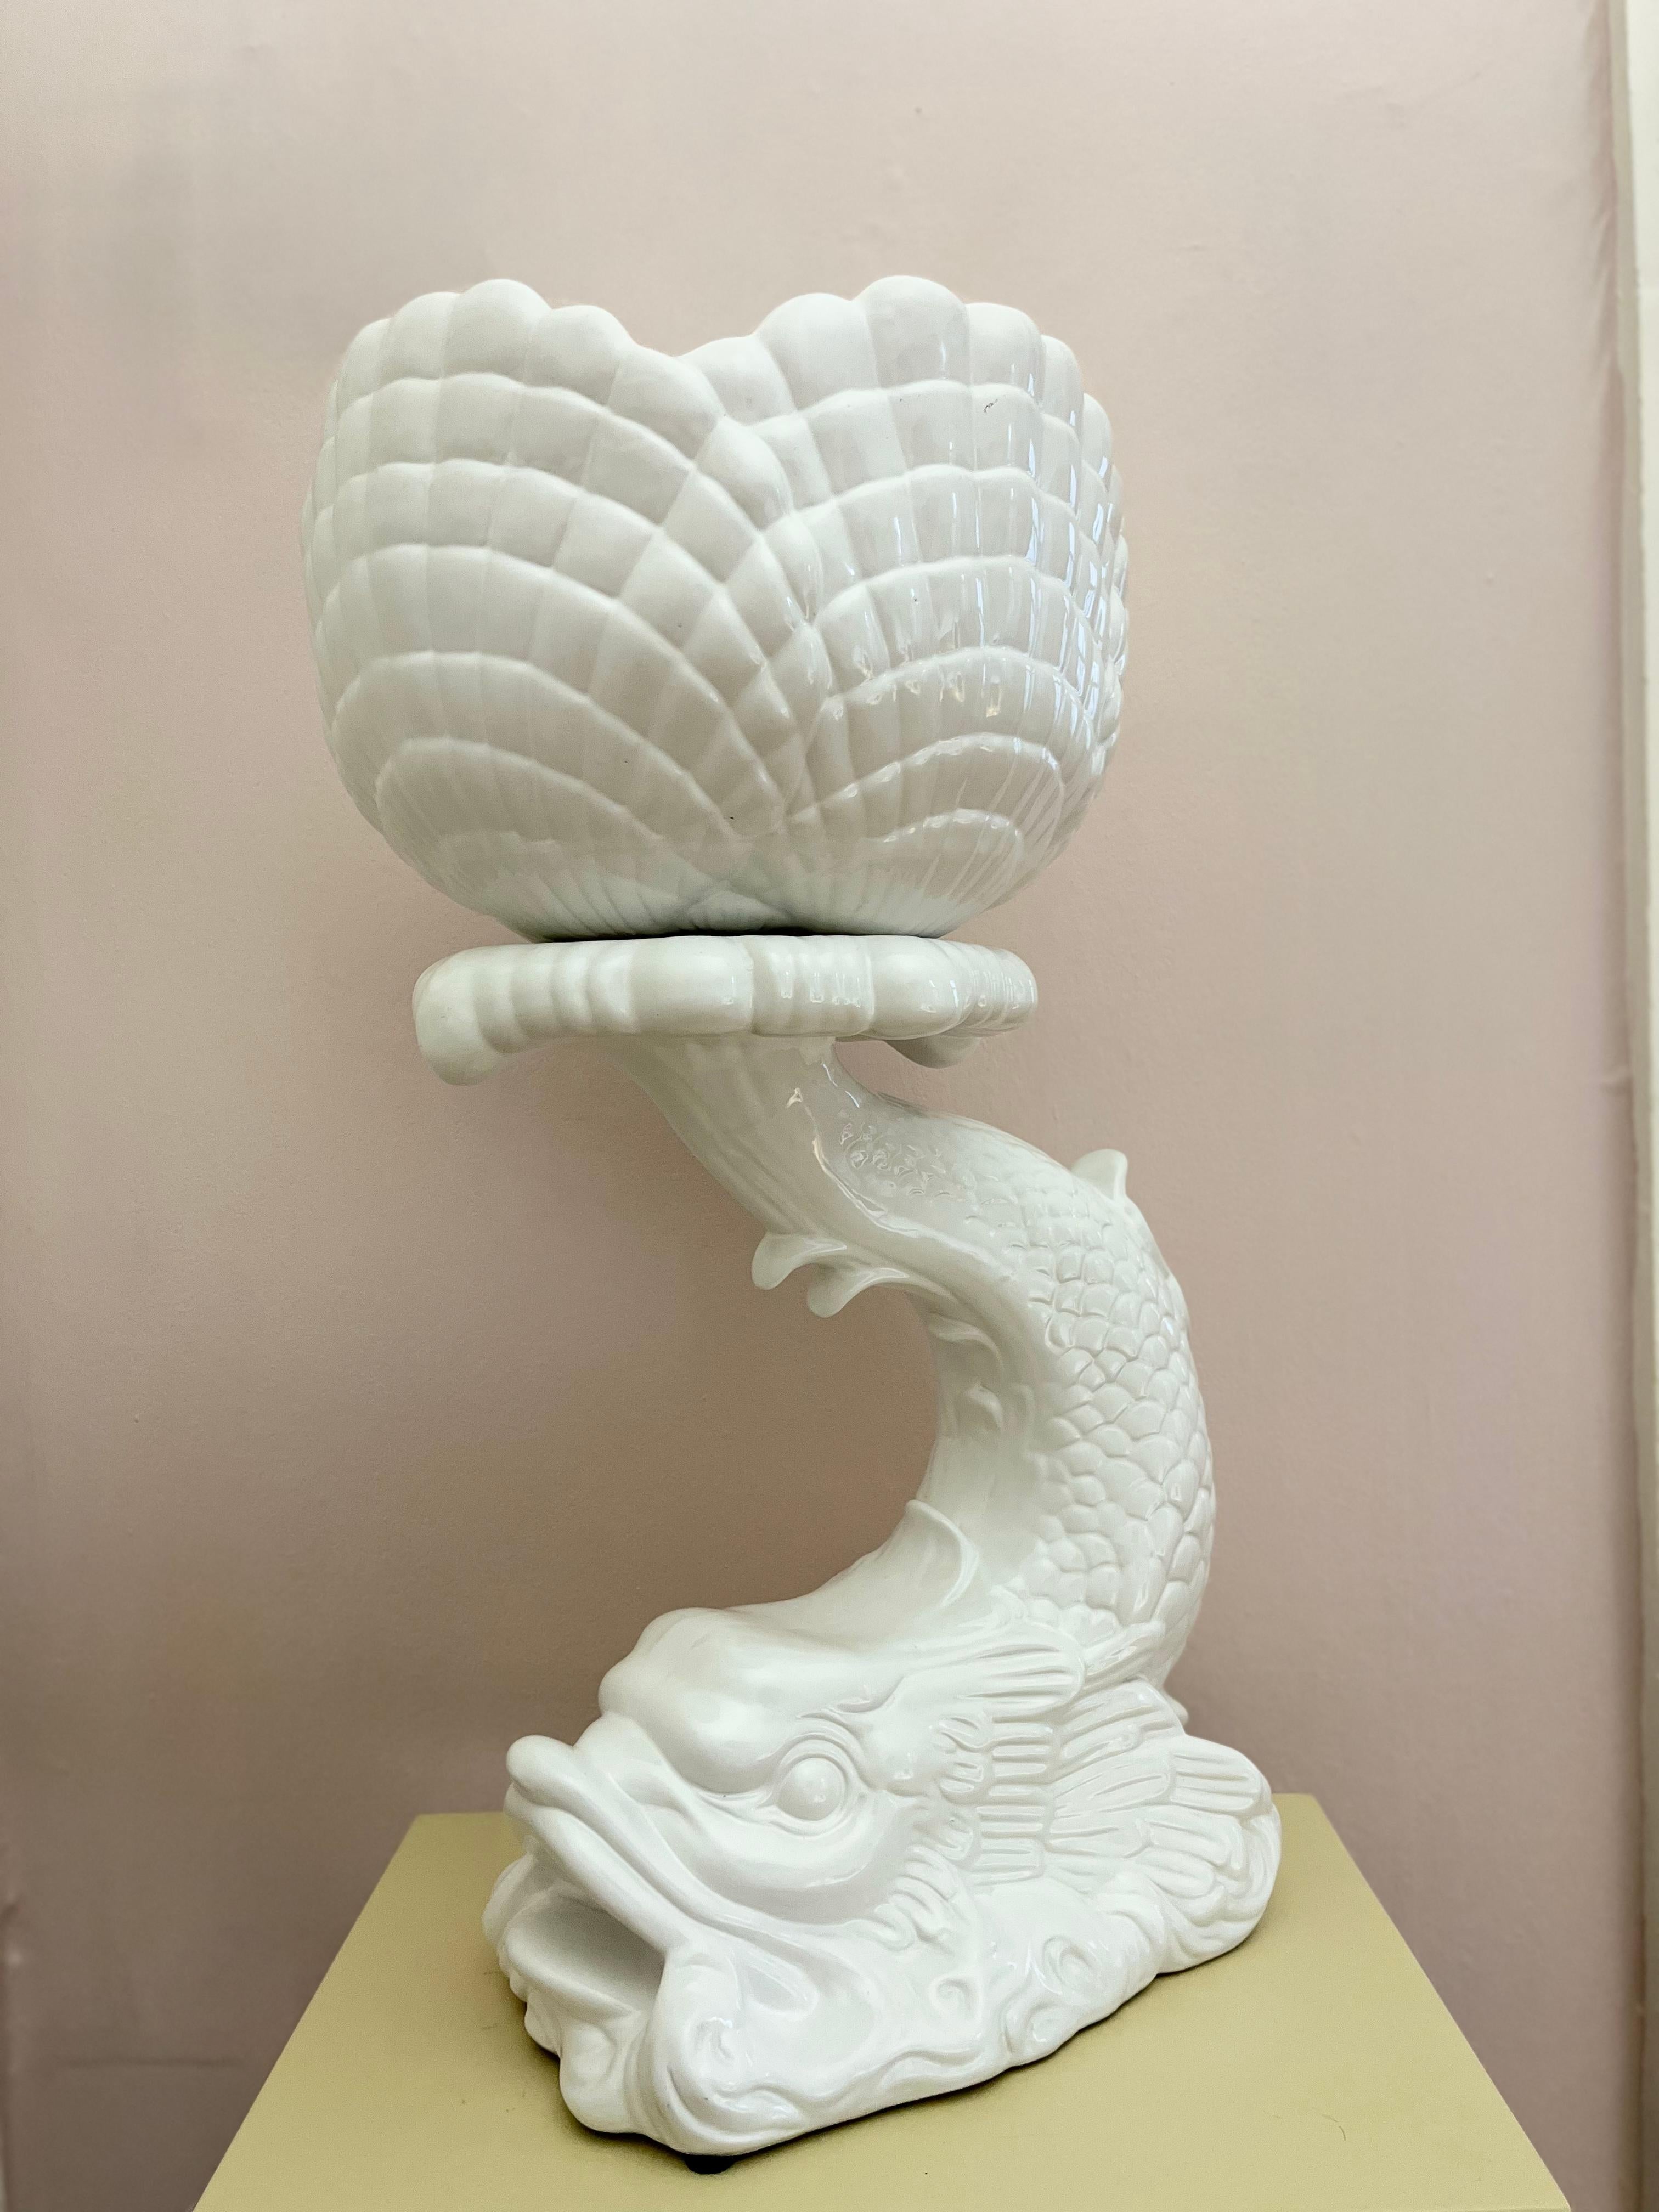 Not for the minimalist, this crazy, detailed, decorative porcelain planter / plant stand is big, both in size and presence. Unsigned, but found in Paris, so it's probably French. In the shape of a dragon-like fish, open mouth and all. Very detailed,